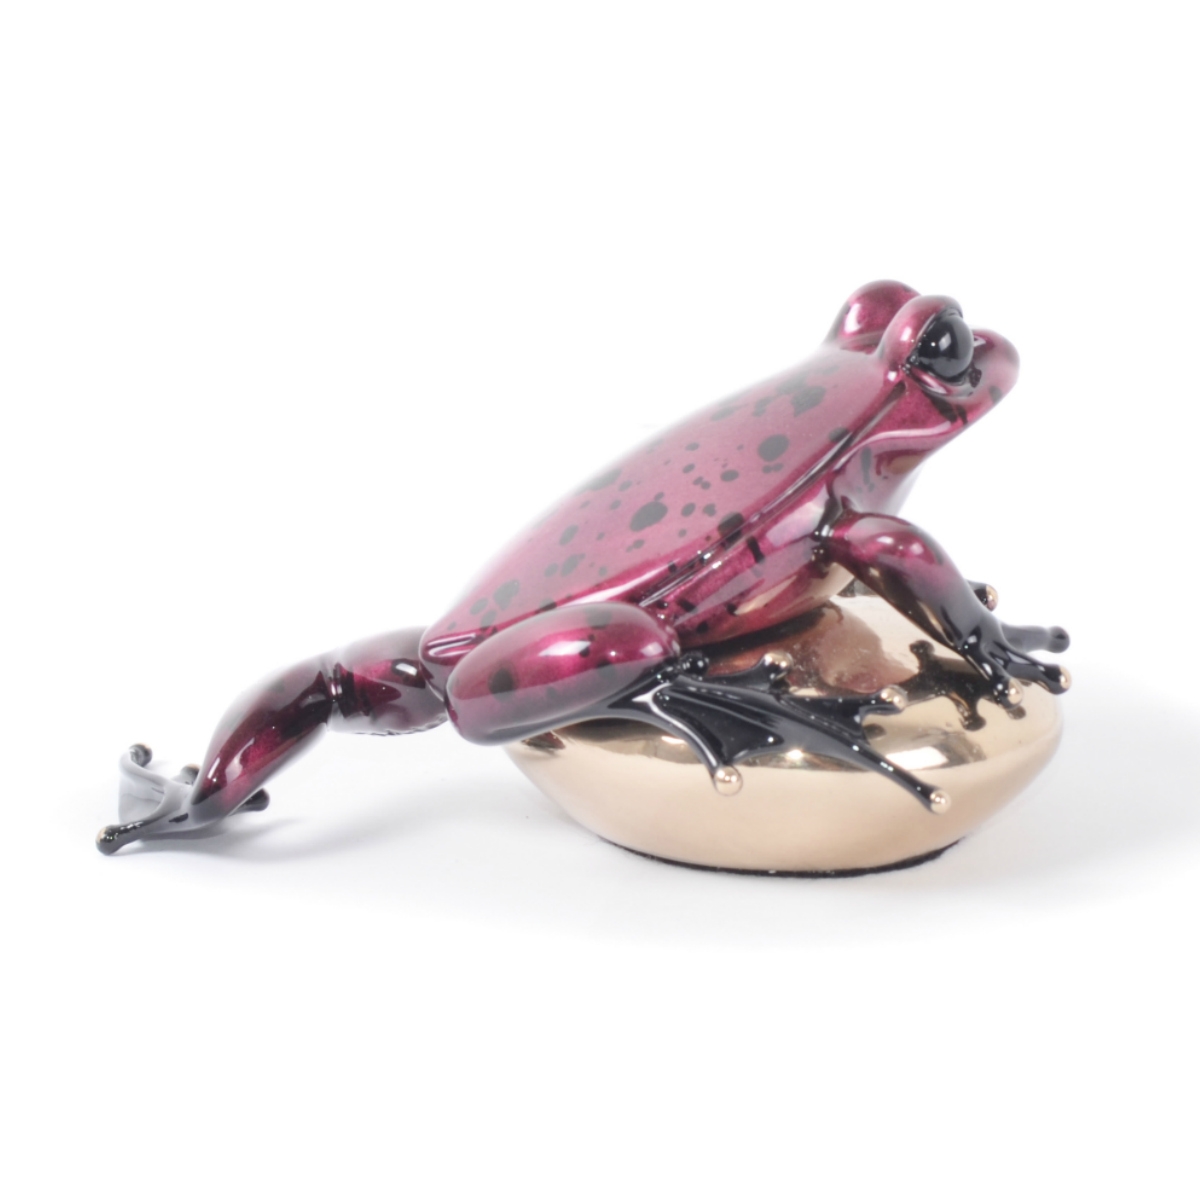 Rock On (Solid Bronze Frog Sculpture) by Tim Cotterill Frogman